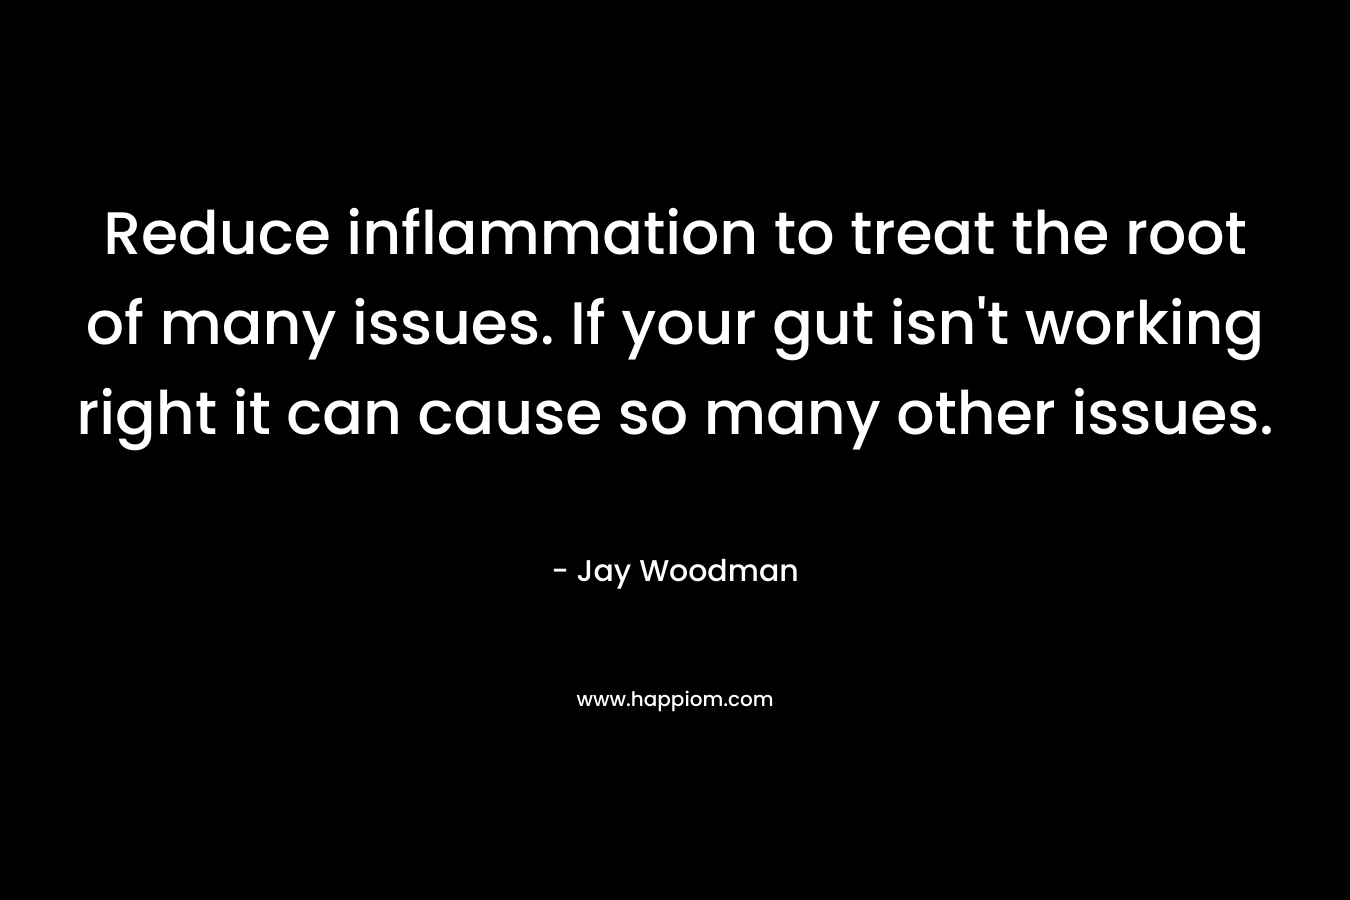 Reduce inflammation to treat the root of many issues. If your gut isn't working right it can cause so many other issues.